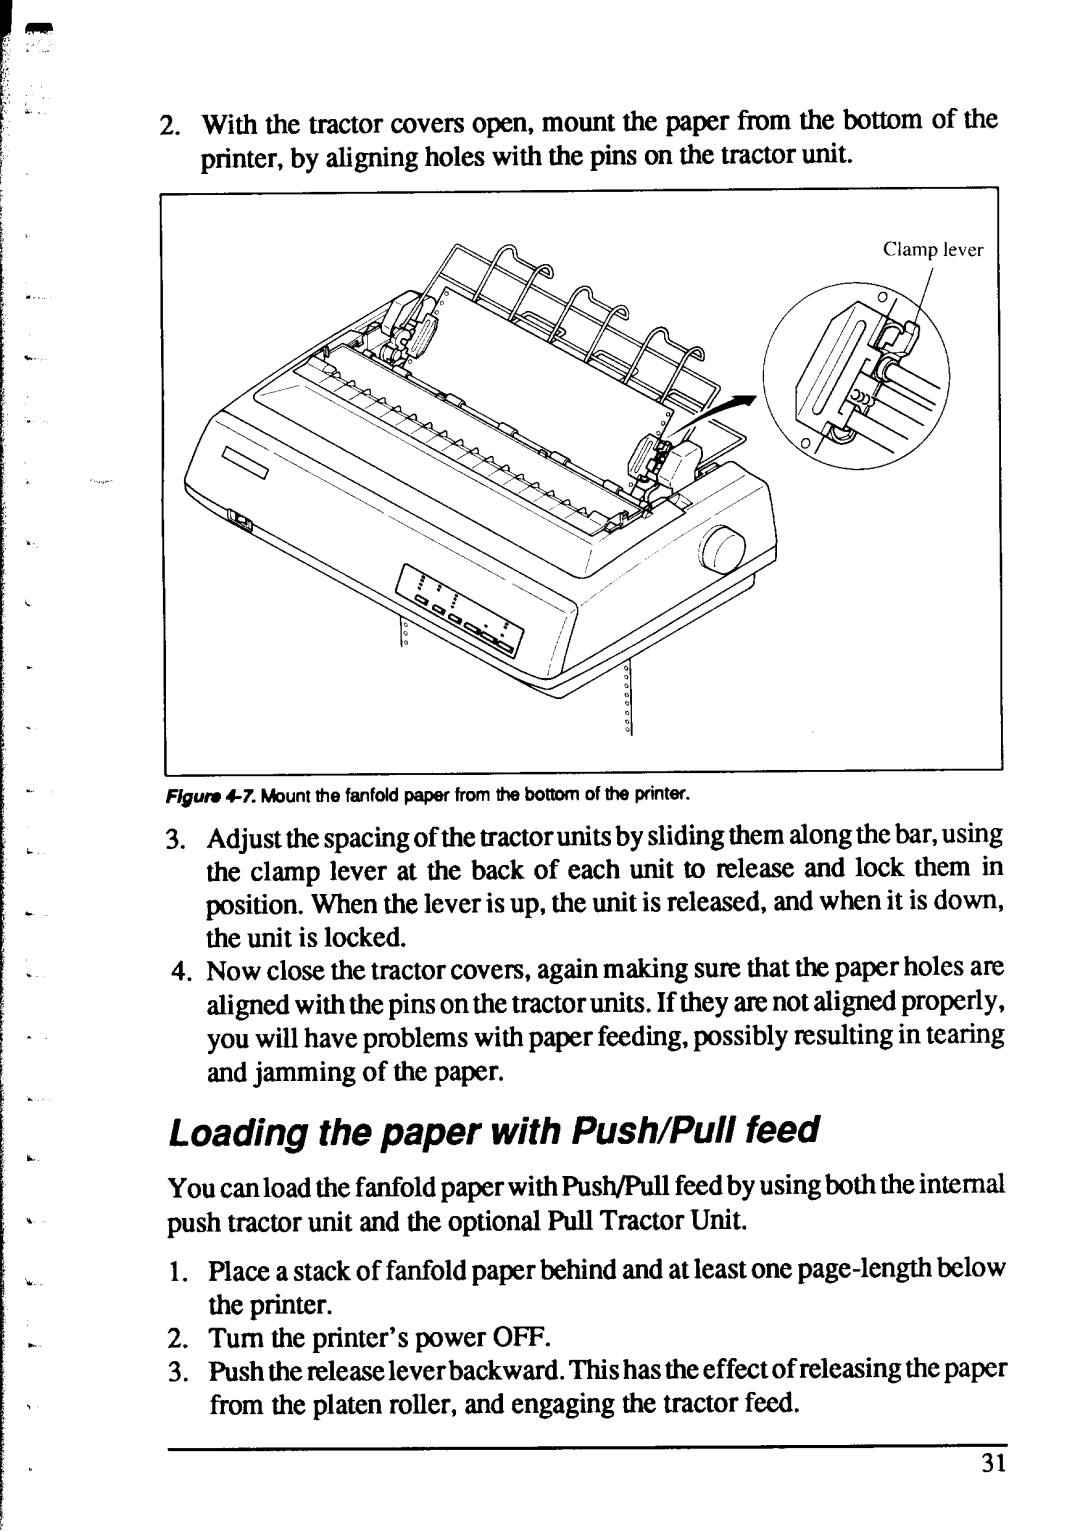 Star Micronics XR-1520, XR-1020 manual Loading the paper with Push/Pull feed 